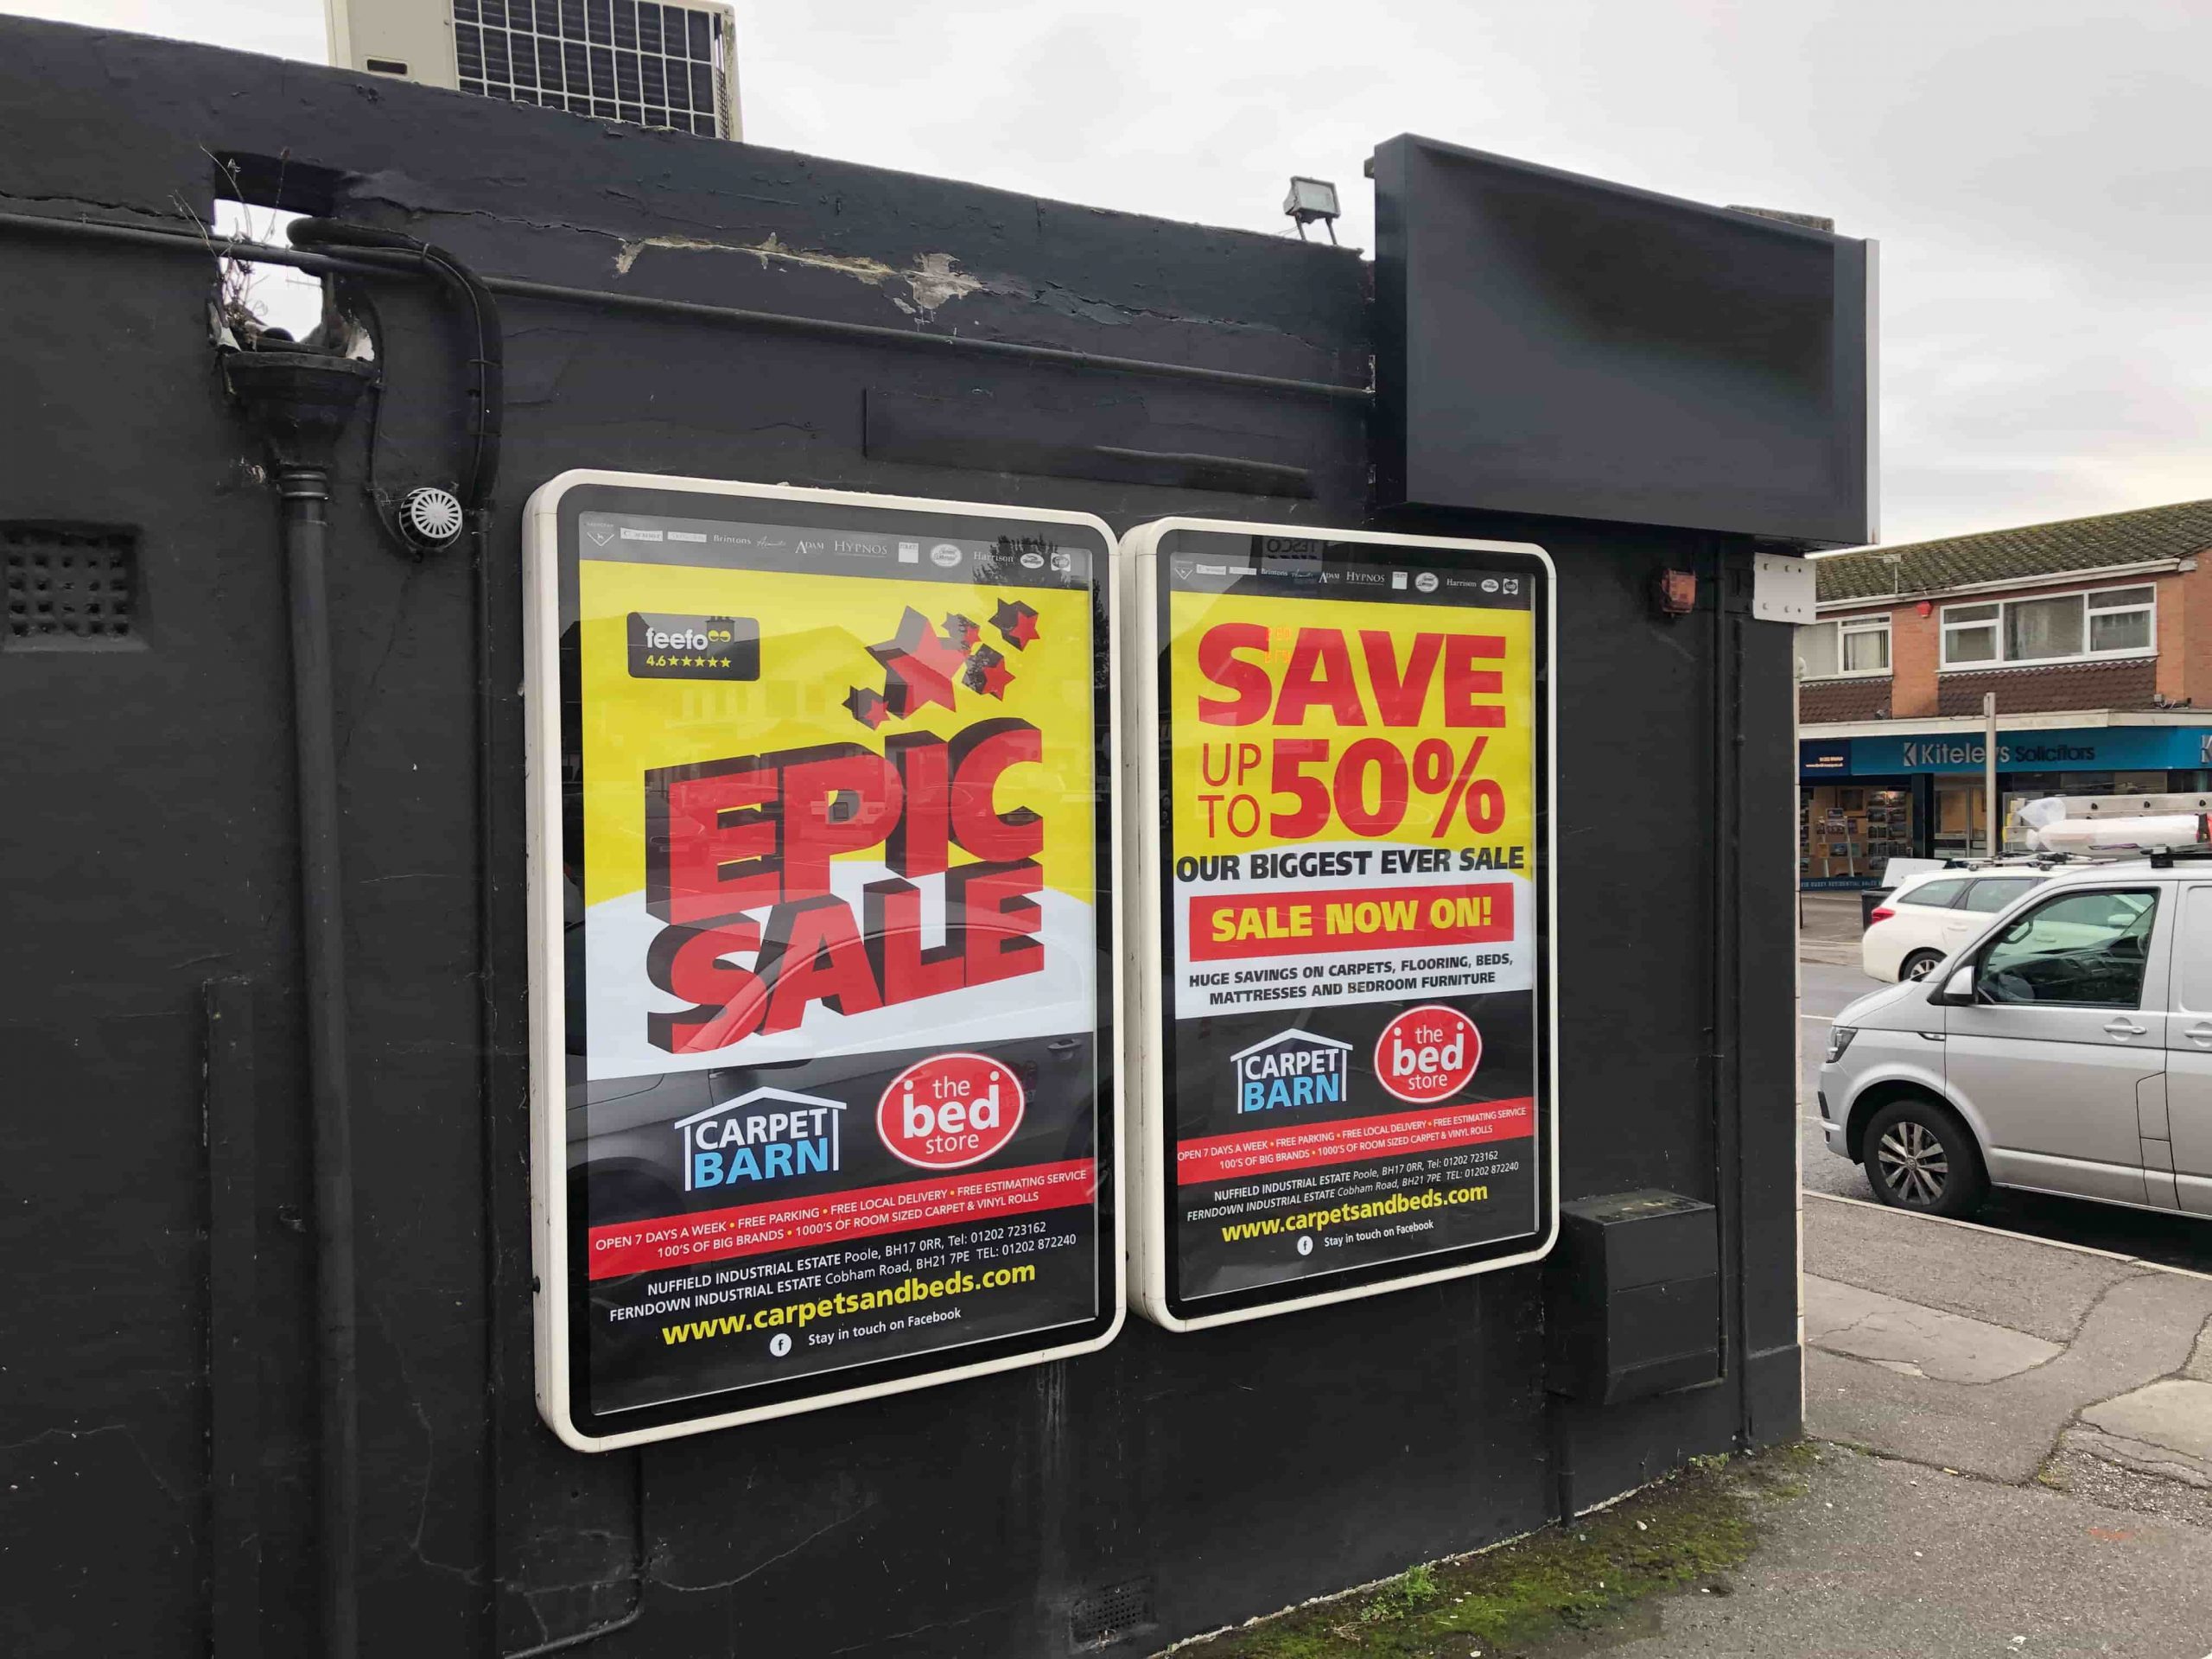 outdoor advertising space